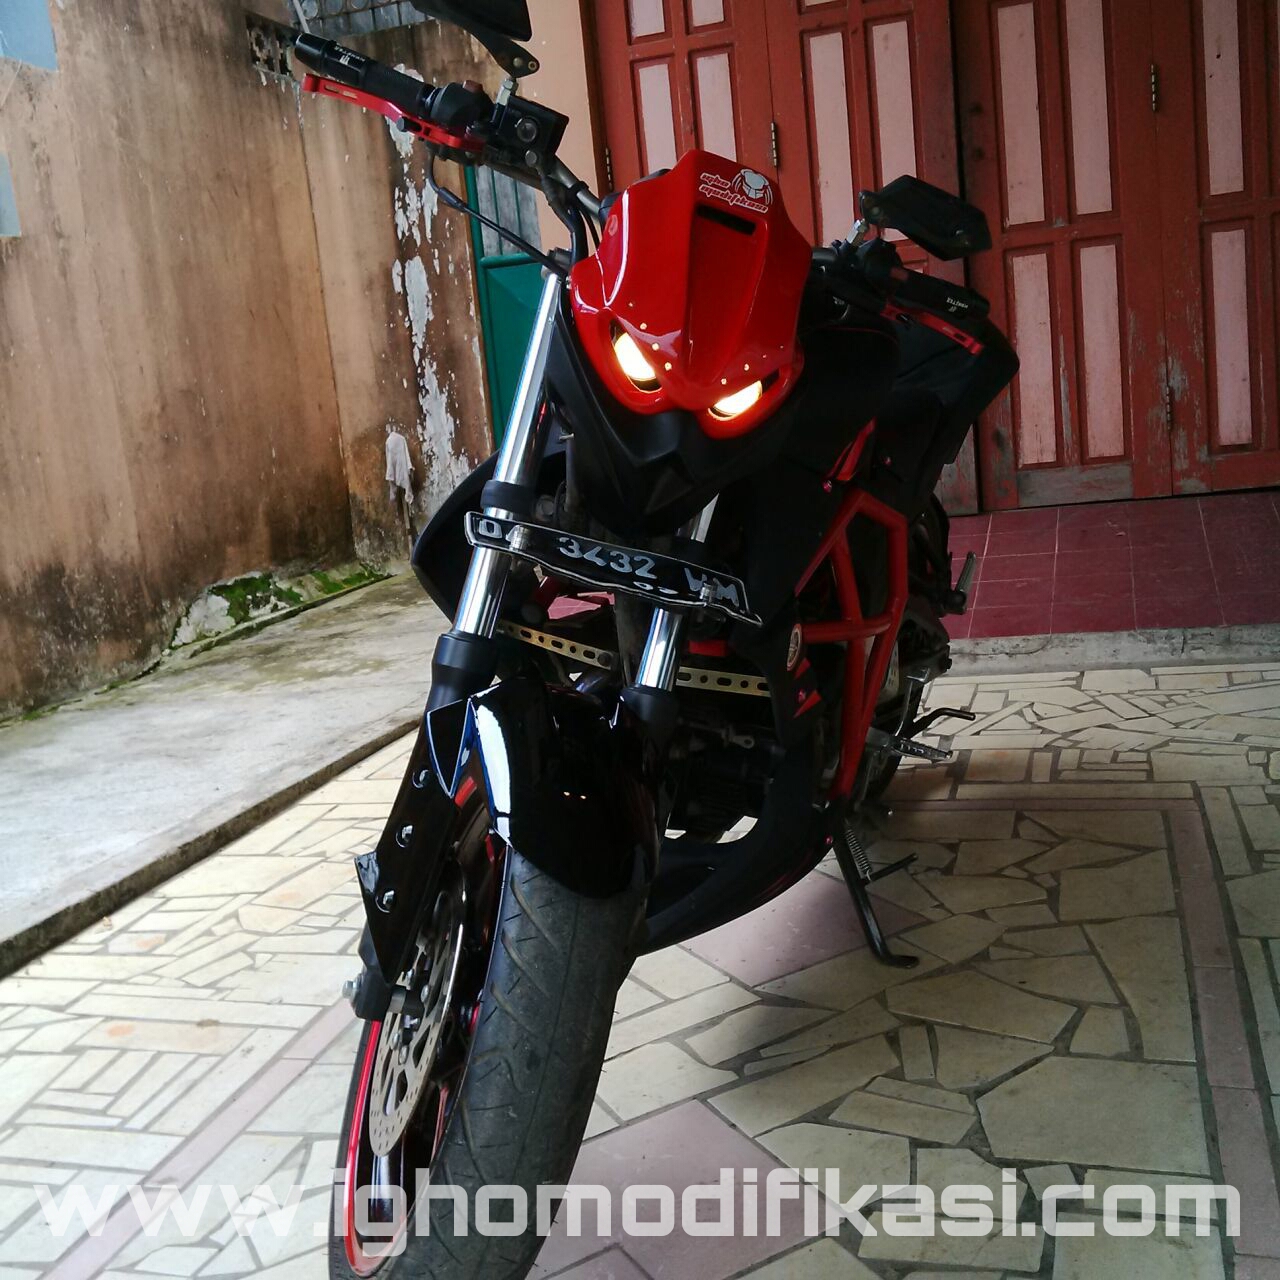 Igho Modifikasi Street Fighter Style Unlimited Creation